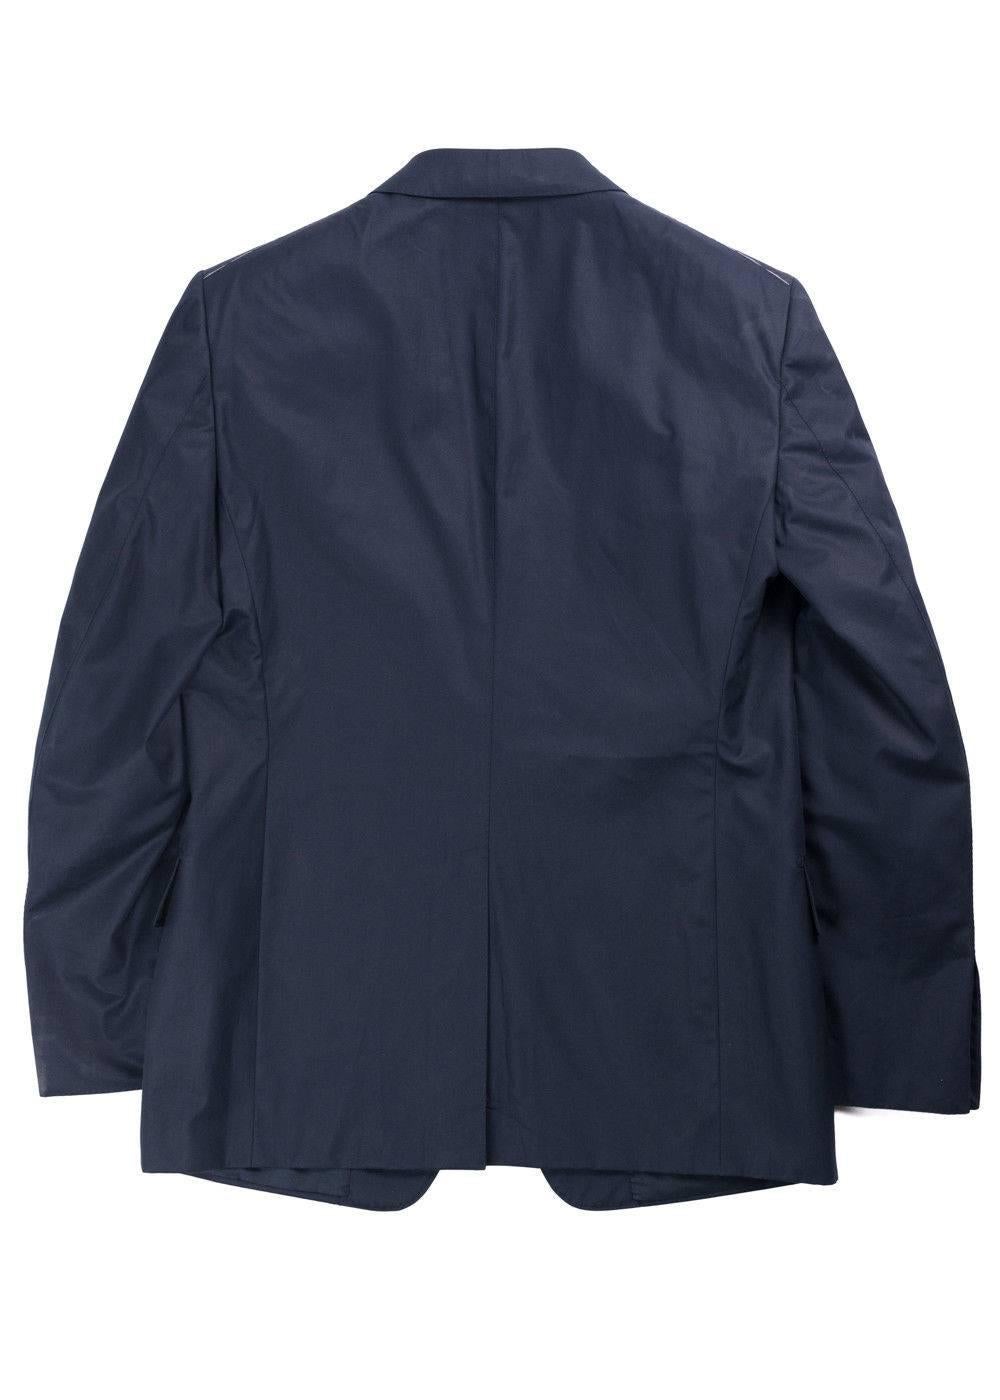 Tom Ford Navy Shelton Base Cotton 2-Piece Suit In New Condition For Sale In Brooklyn, NY